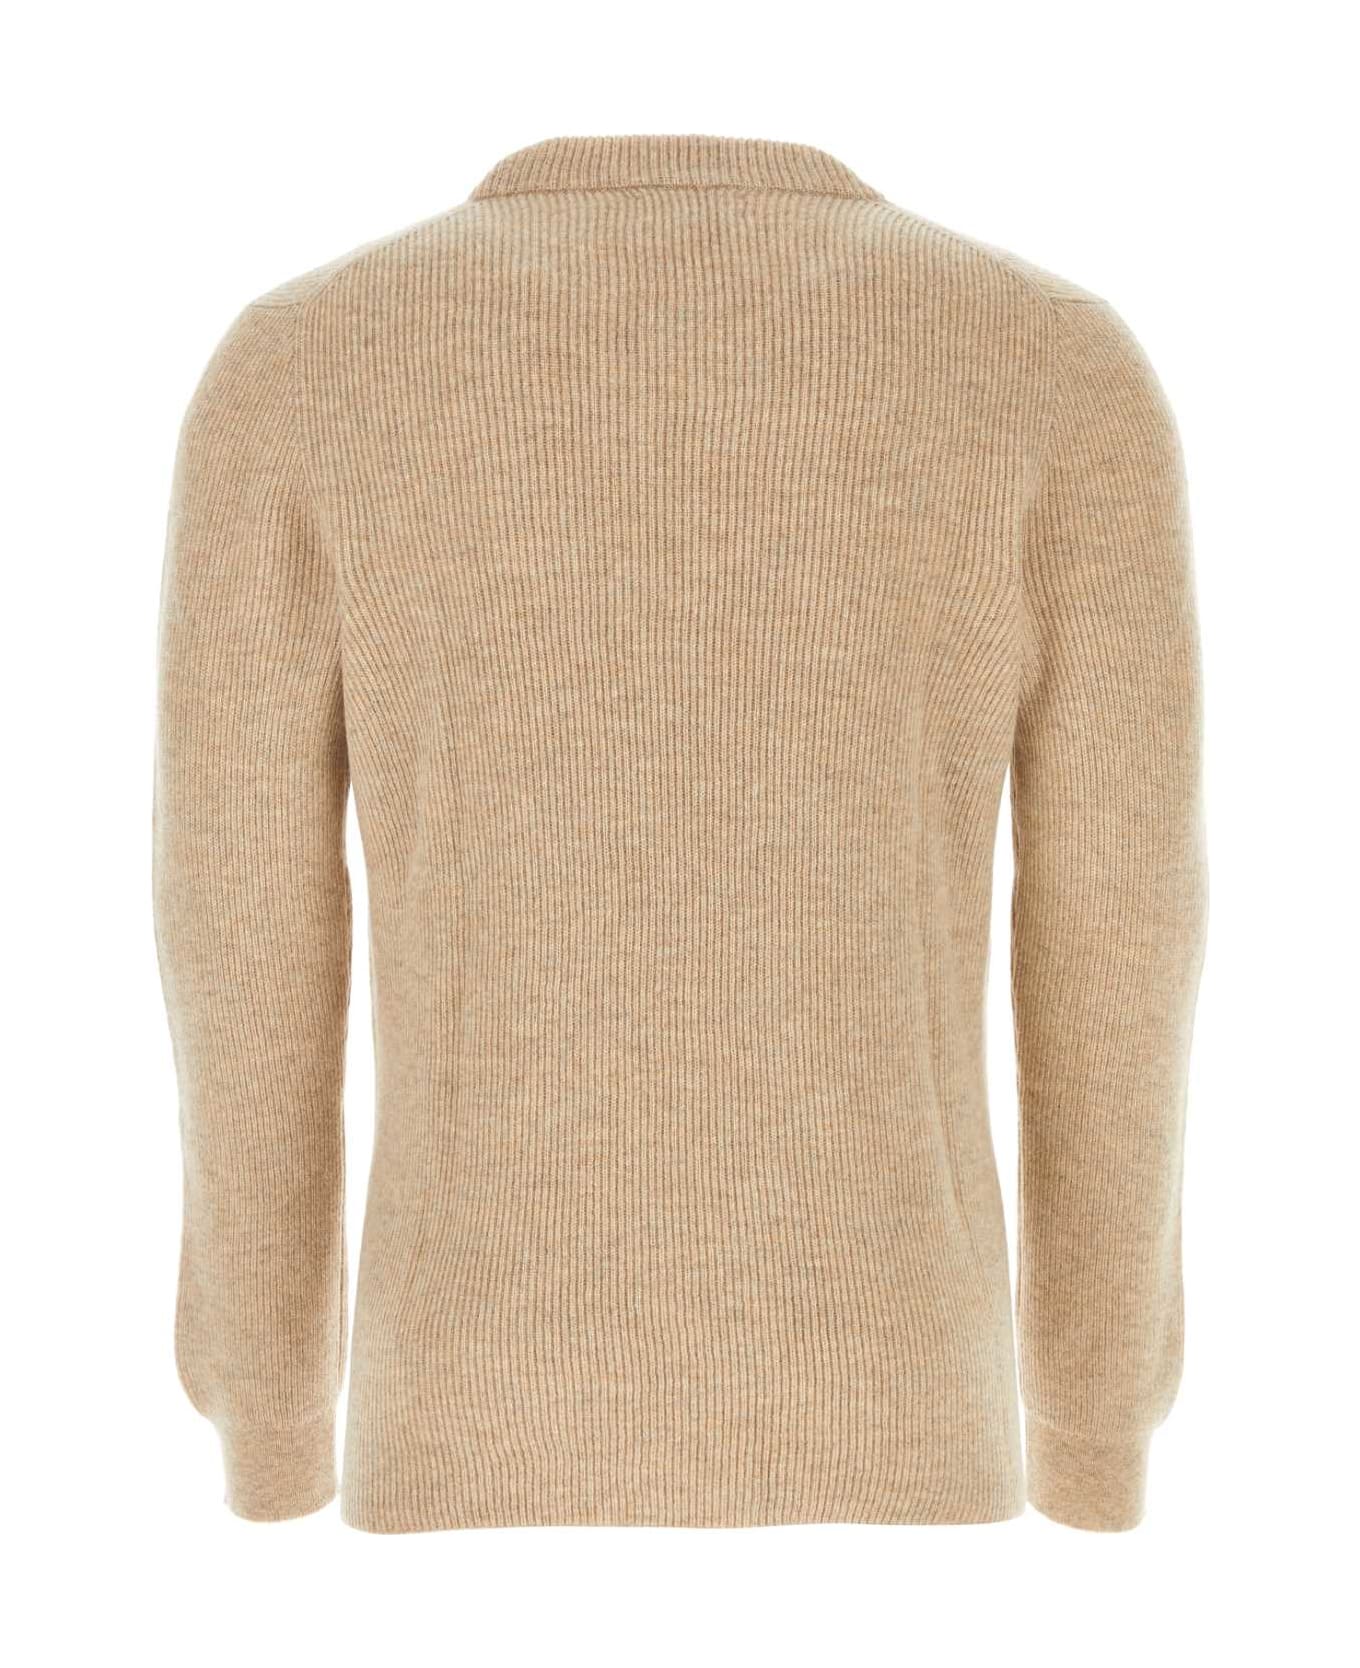 Johnstons of Elgin Beige Cashmere Sweater - OATMEAL